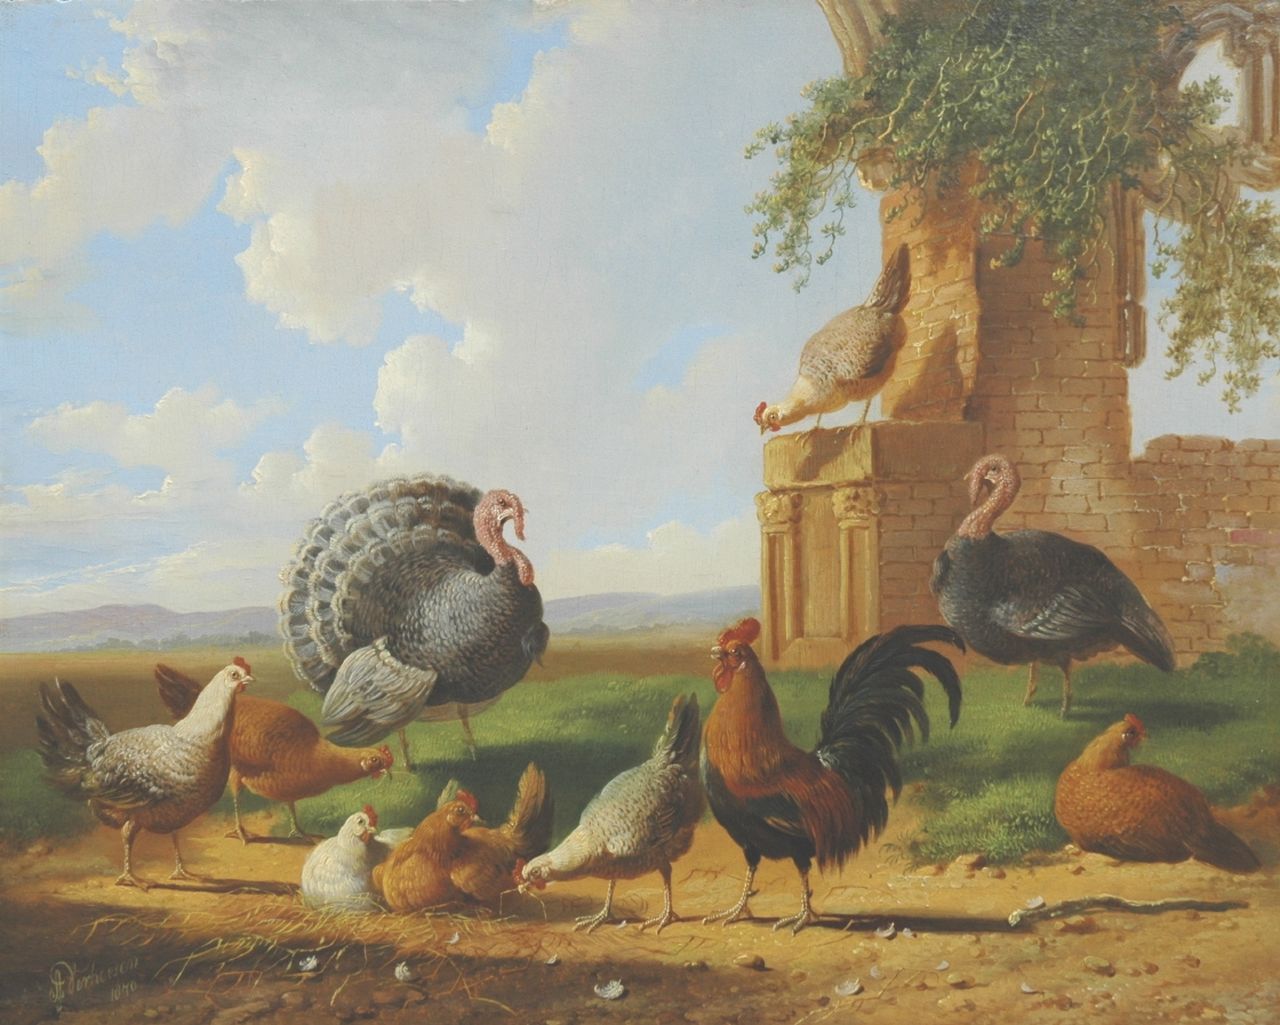 Verhoesen A.  | Albertus Verhoesen, Turkeys and chickens in a landscape, oil on panel 30.5 x 37.6 cm, signed l.l. and painted 1870